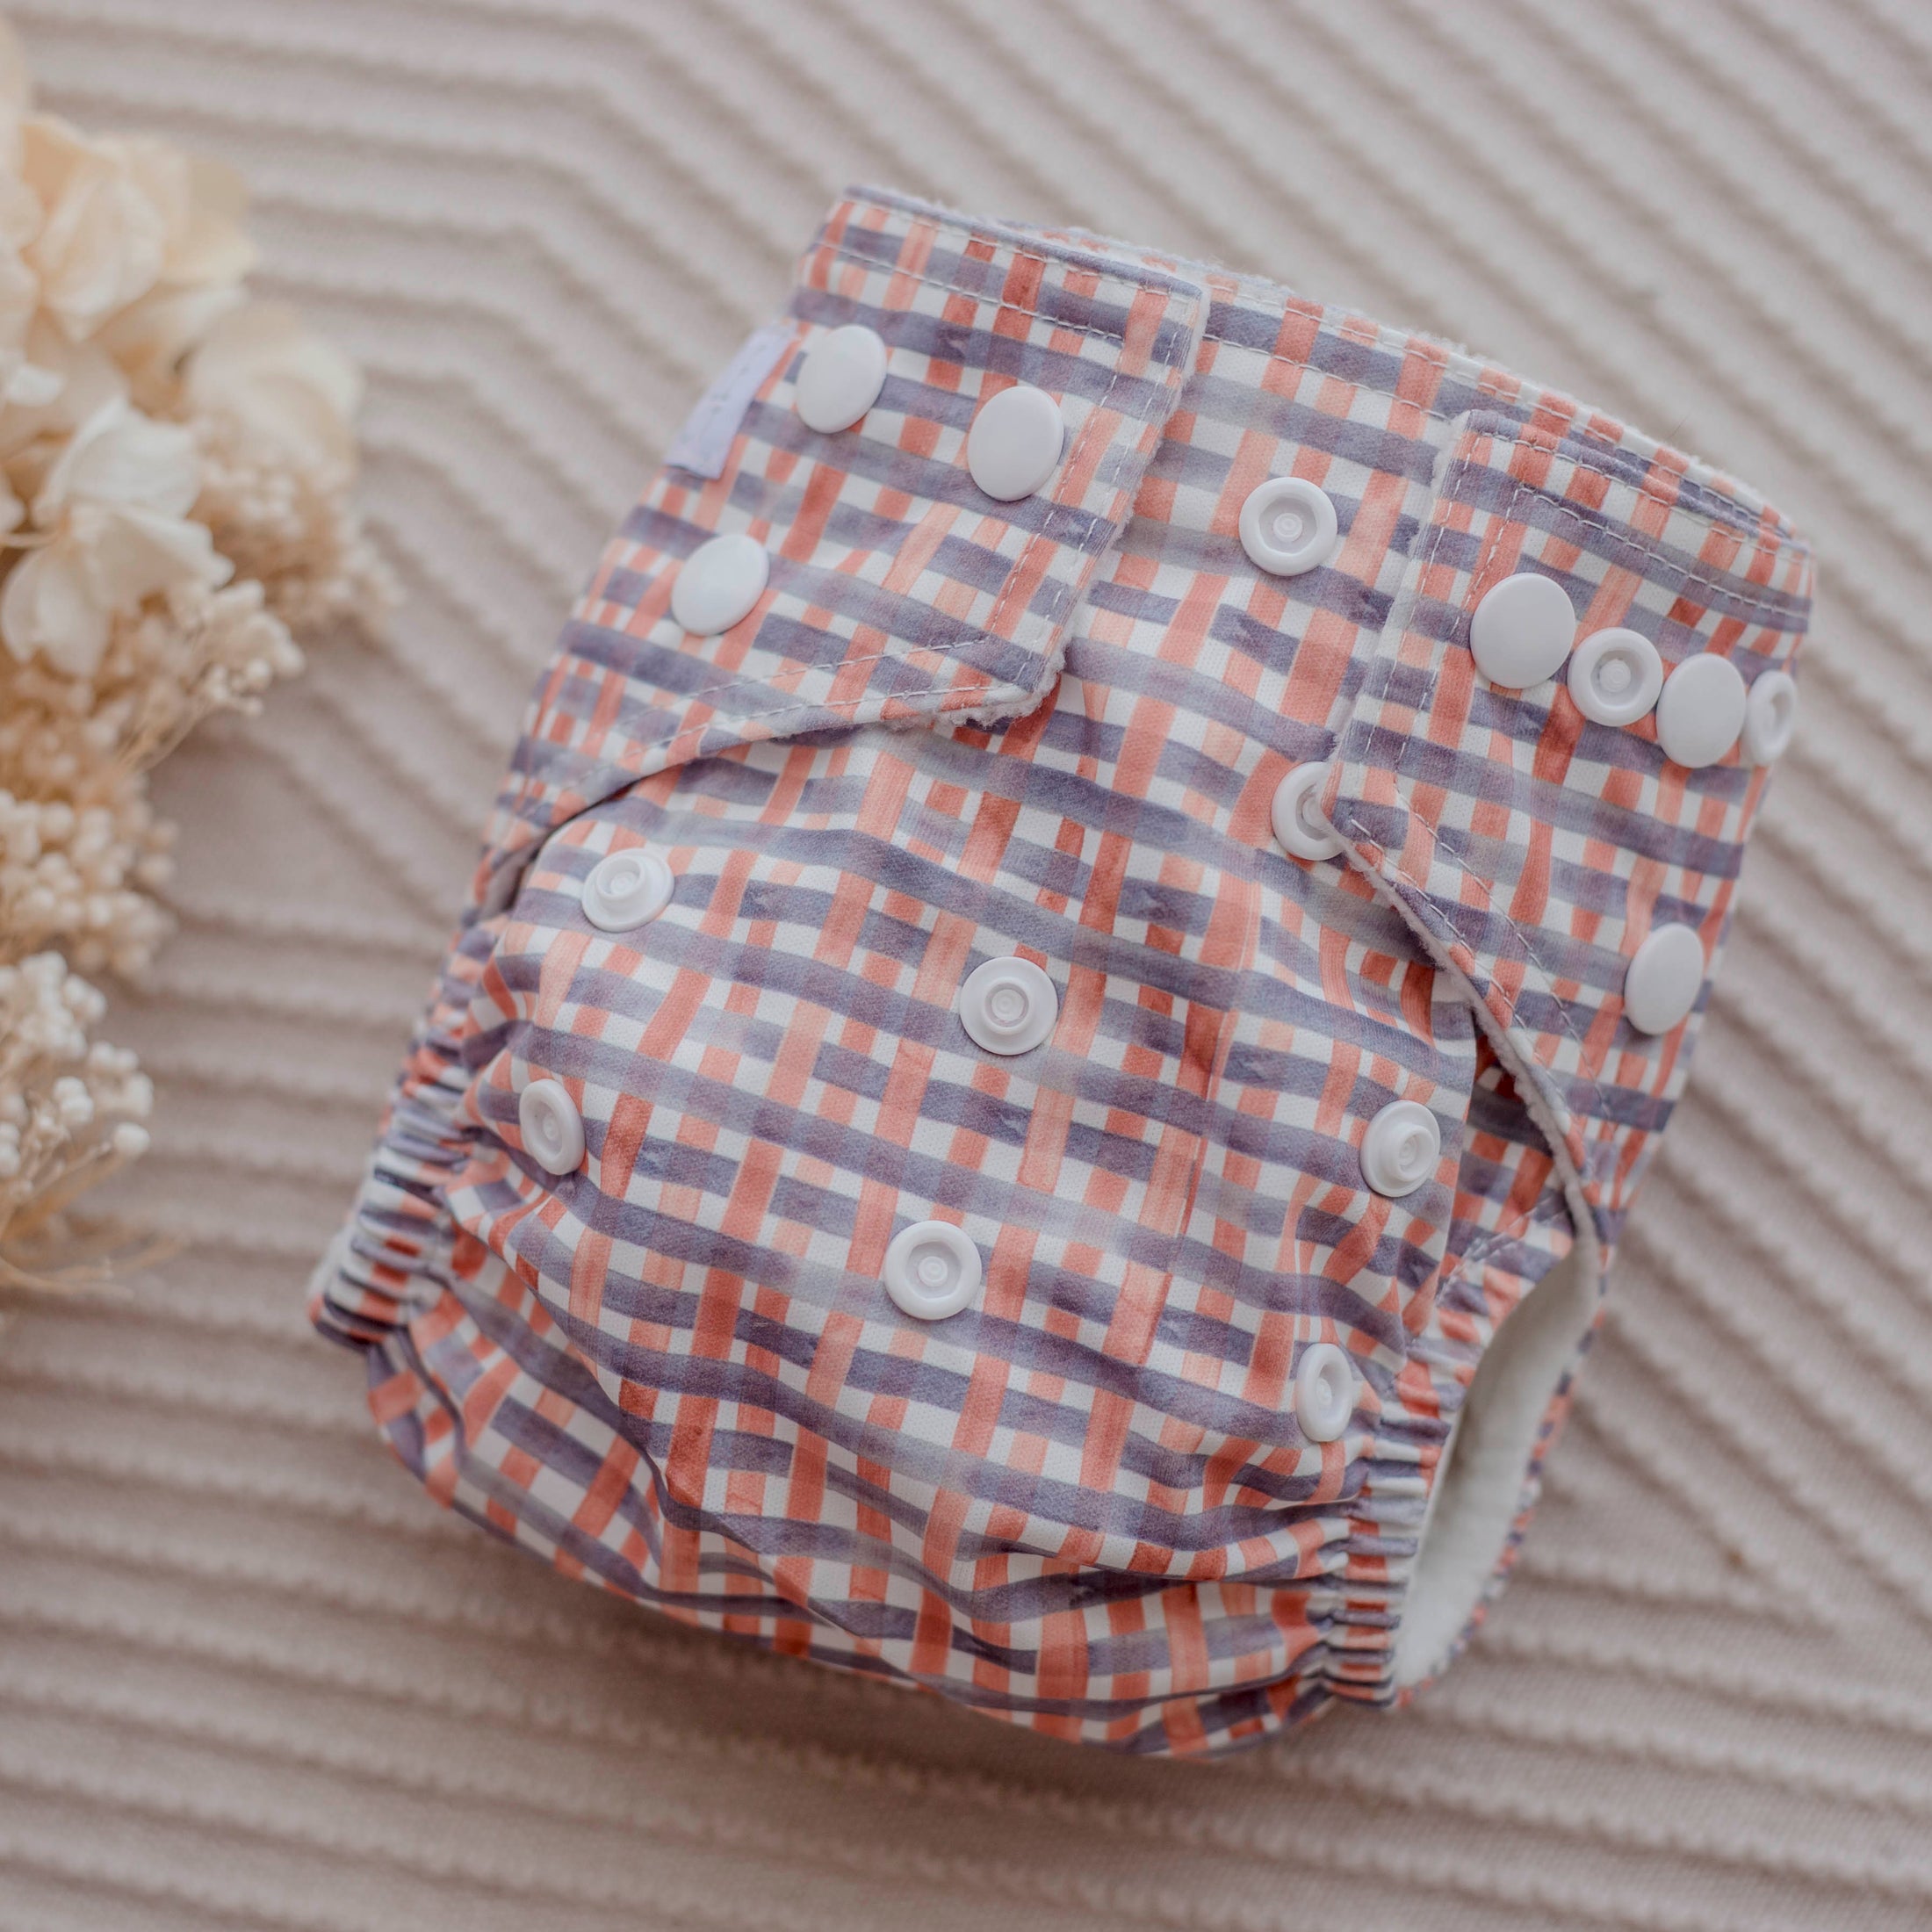 Newborn Modern cloth nappies by my little gumnut. australian owned reusable nappies. bamboo cloth nappies. cloth nappies for newborn. premmie cloth nappies australia.